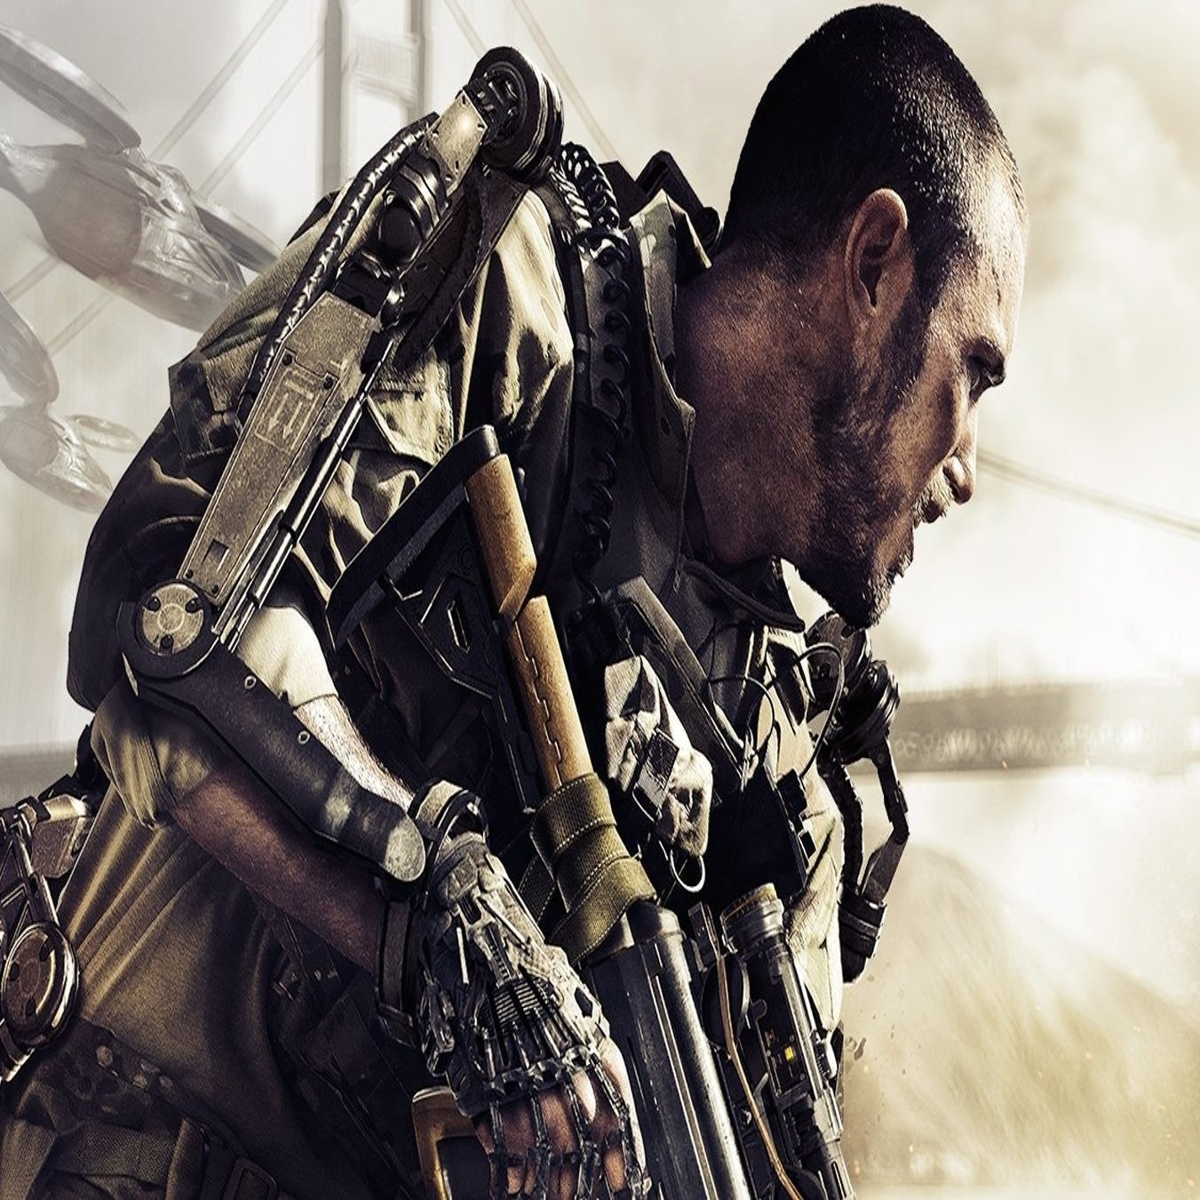 Call of Duty: Advanced Warfare is a next-gen showcase -- and it's